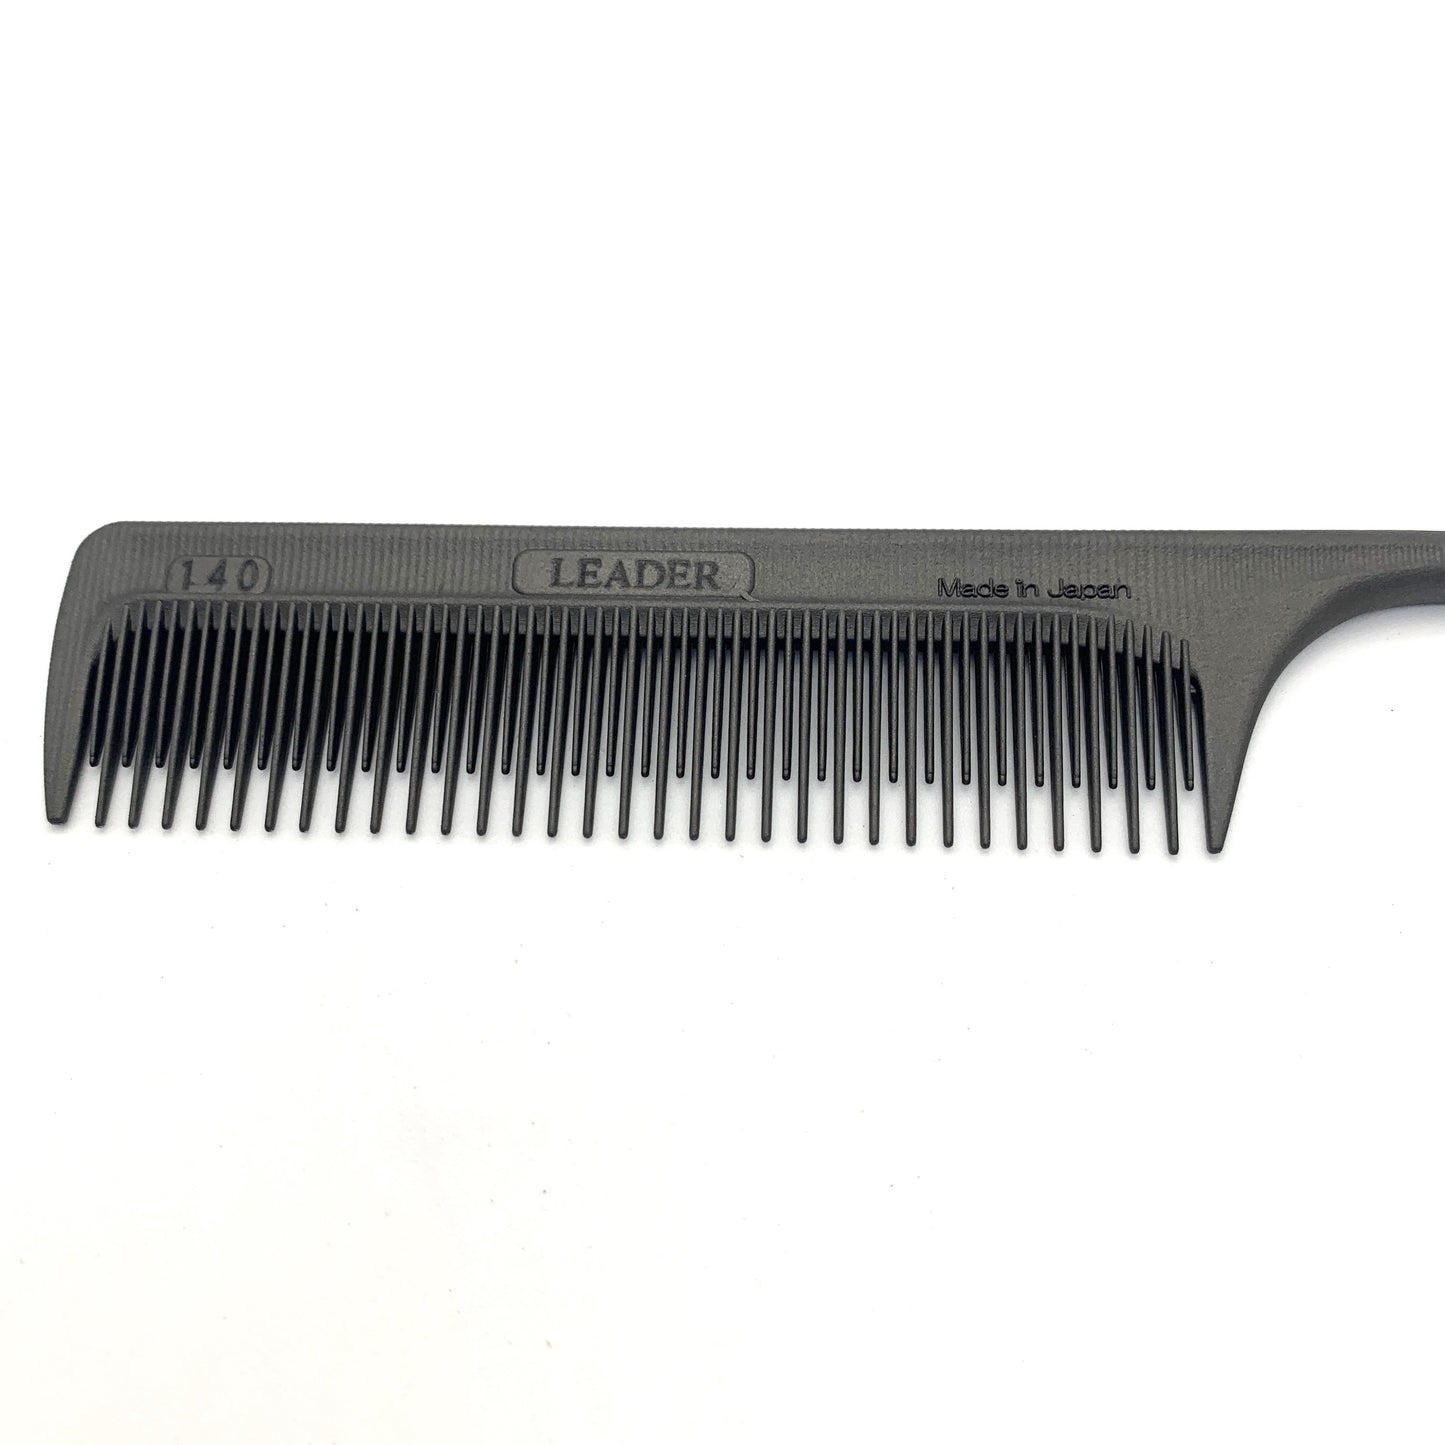 Leader SP 140 Metal Tease/ Tail Comb Hairbrained 